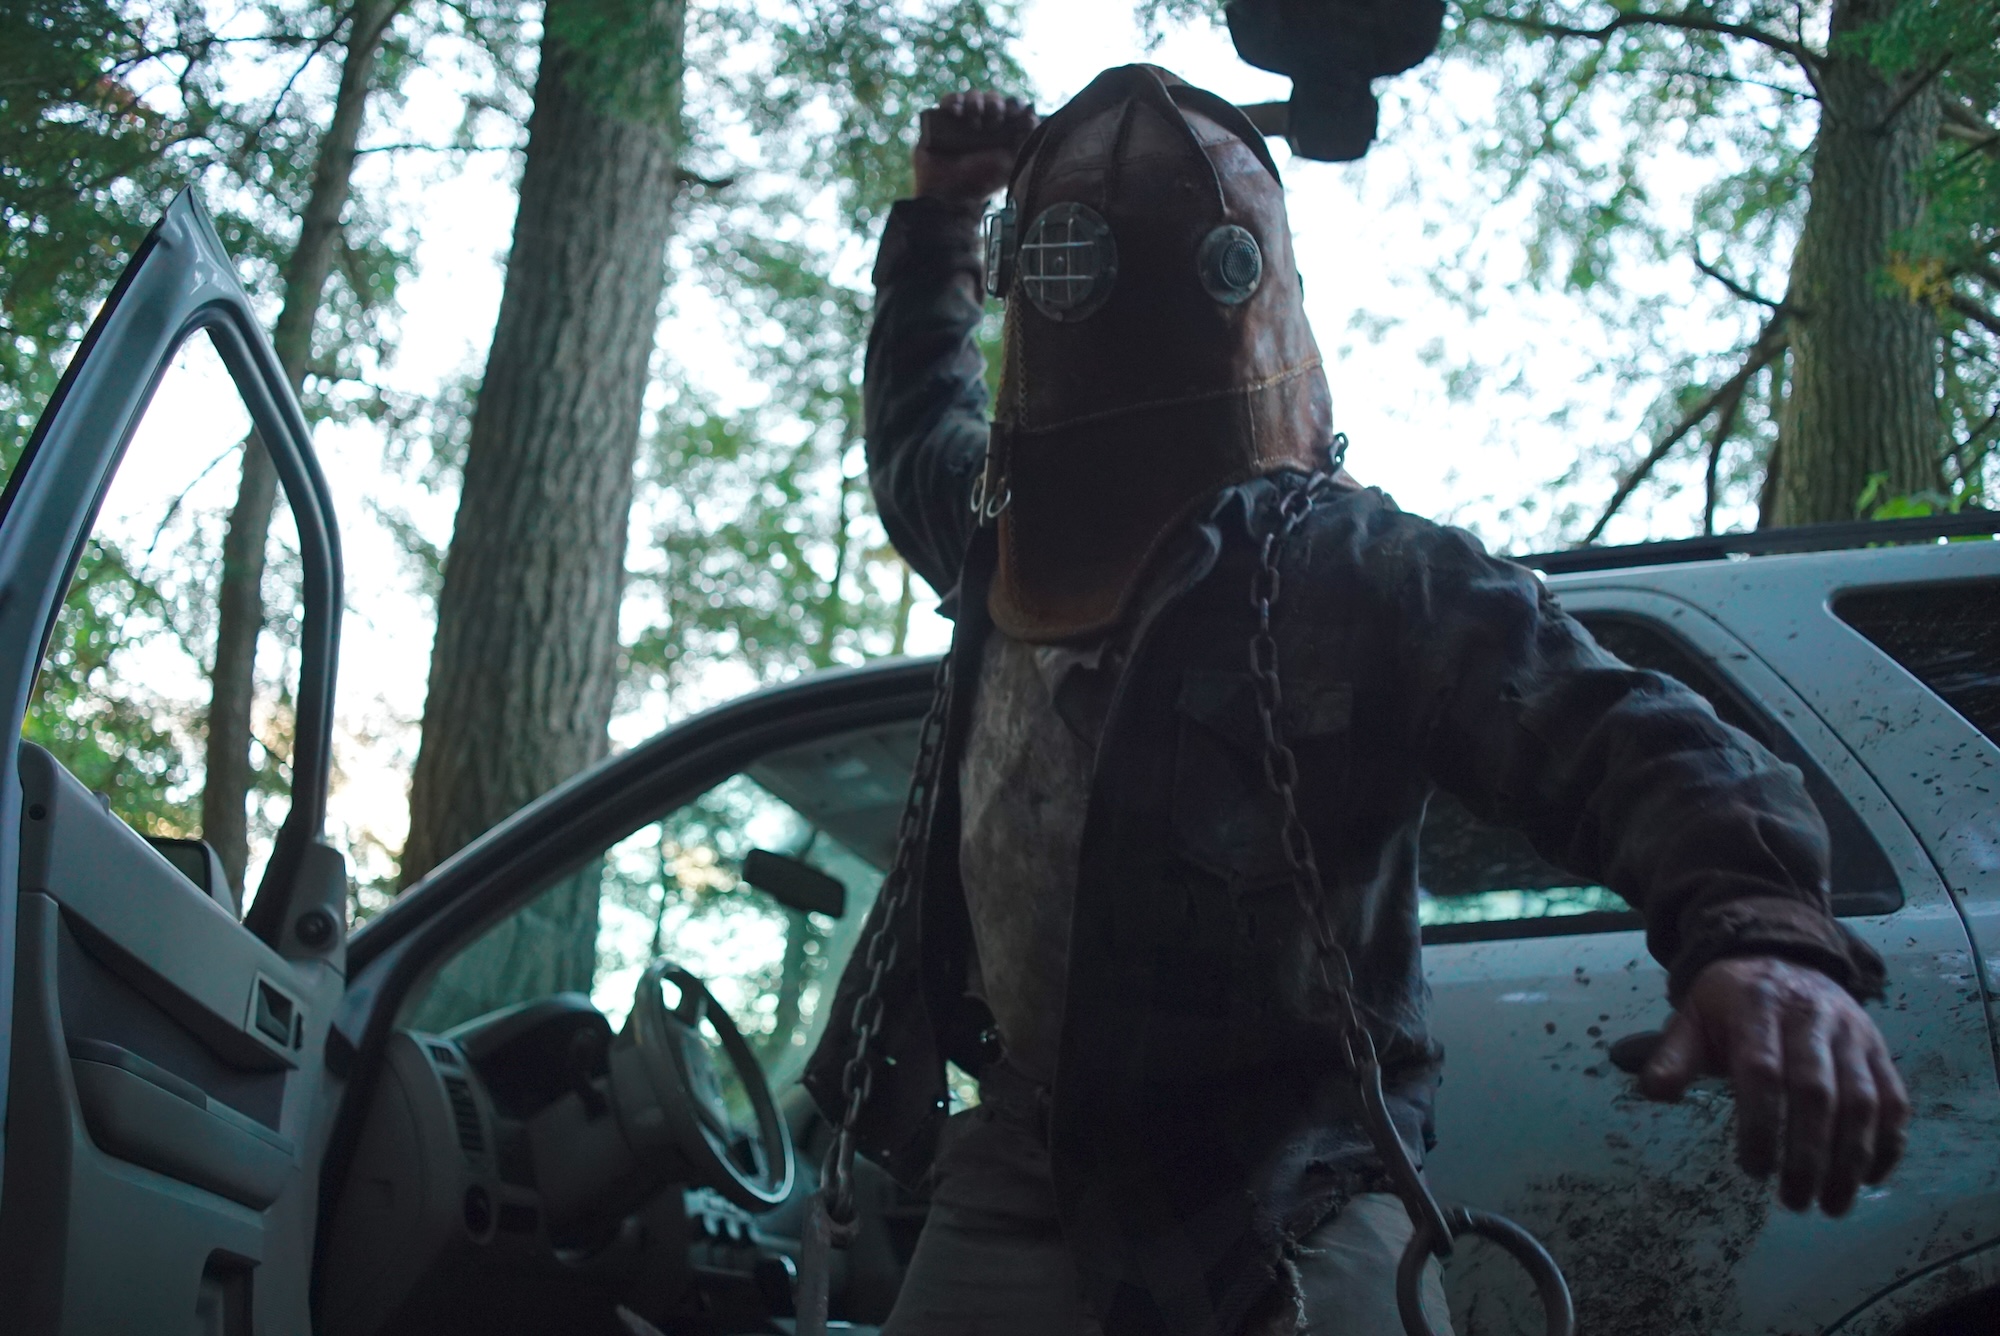 A hooded figure standing in front of a dirty white four-door van raises an axe to swing. They’ve got chains draped around their shoulders and appear to be in the middle of the woods. (In a Violent Nature)